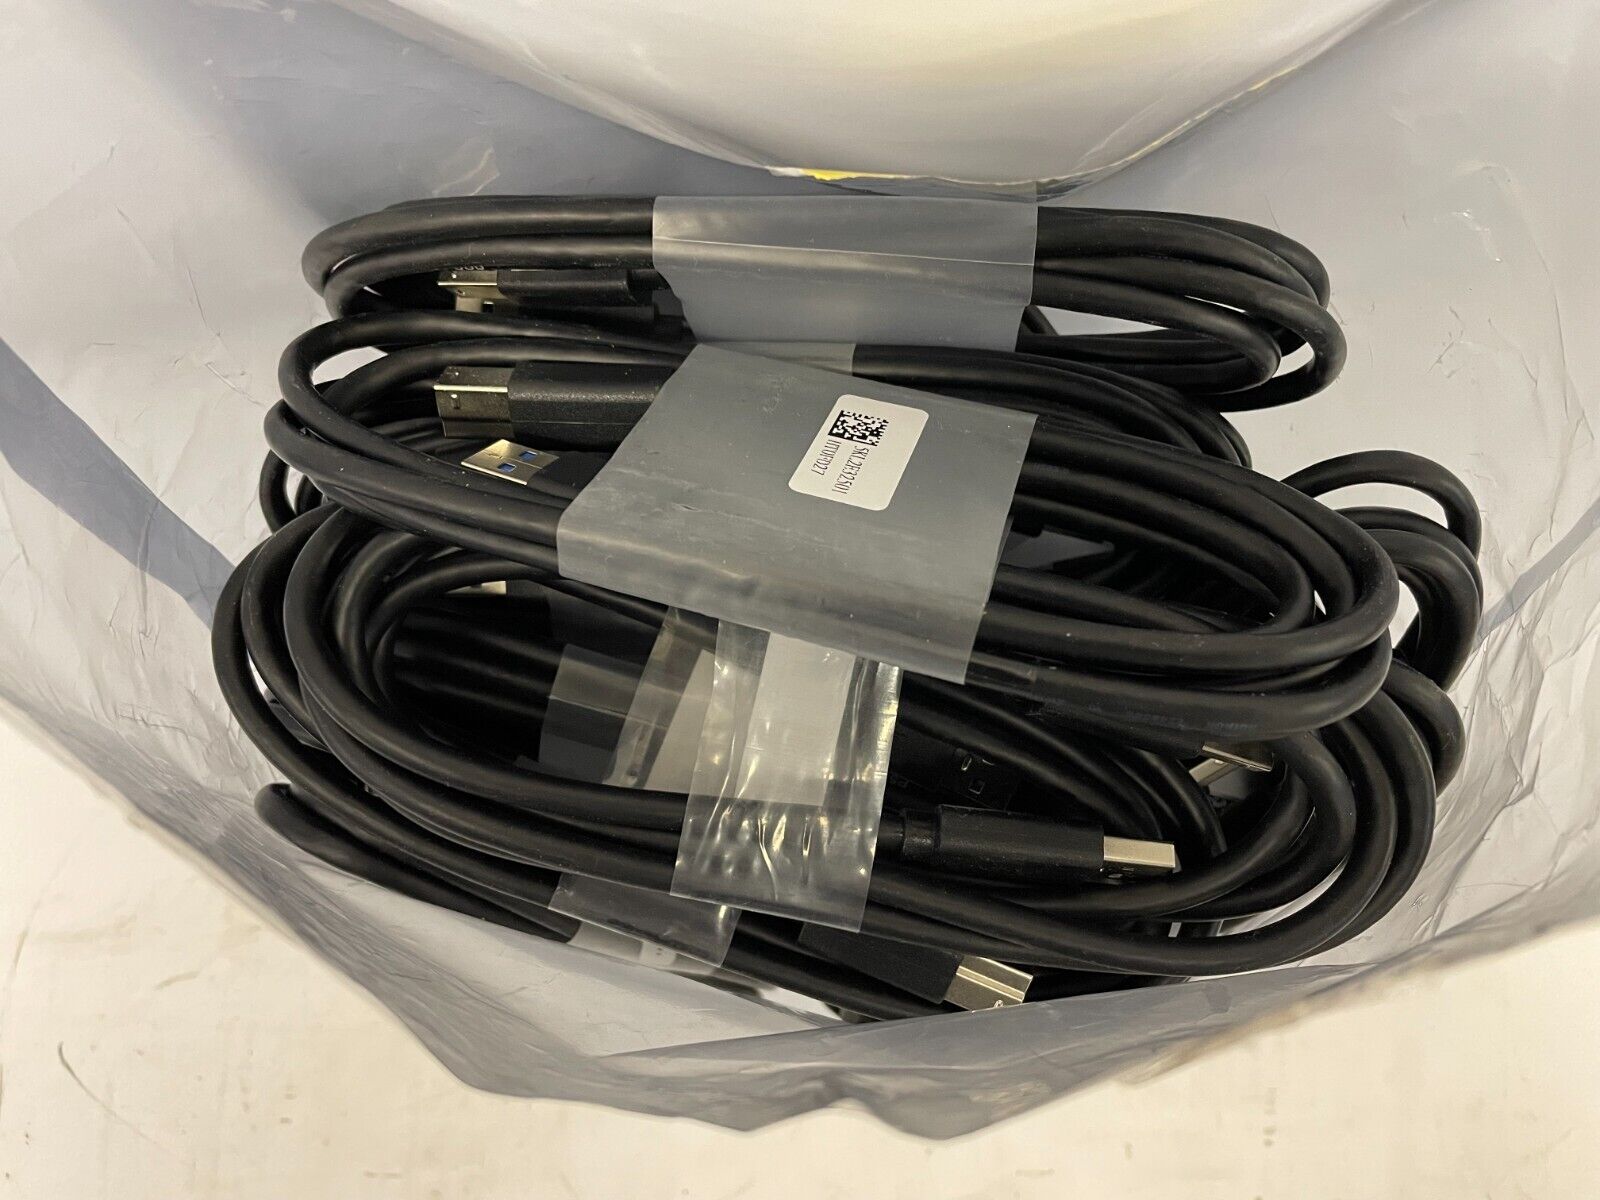 Lot of 22 Genuine Dell 6ft USB 3.0 Cables Type A to Type B 5KL2E22501